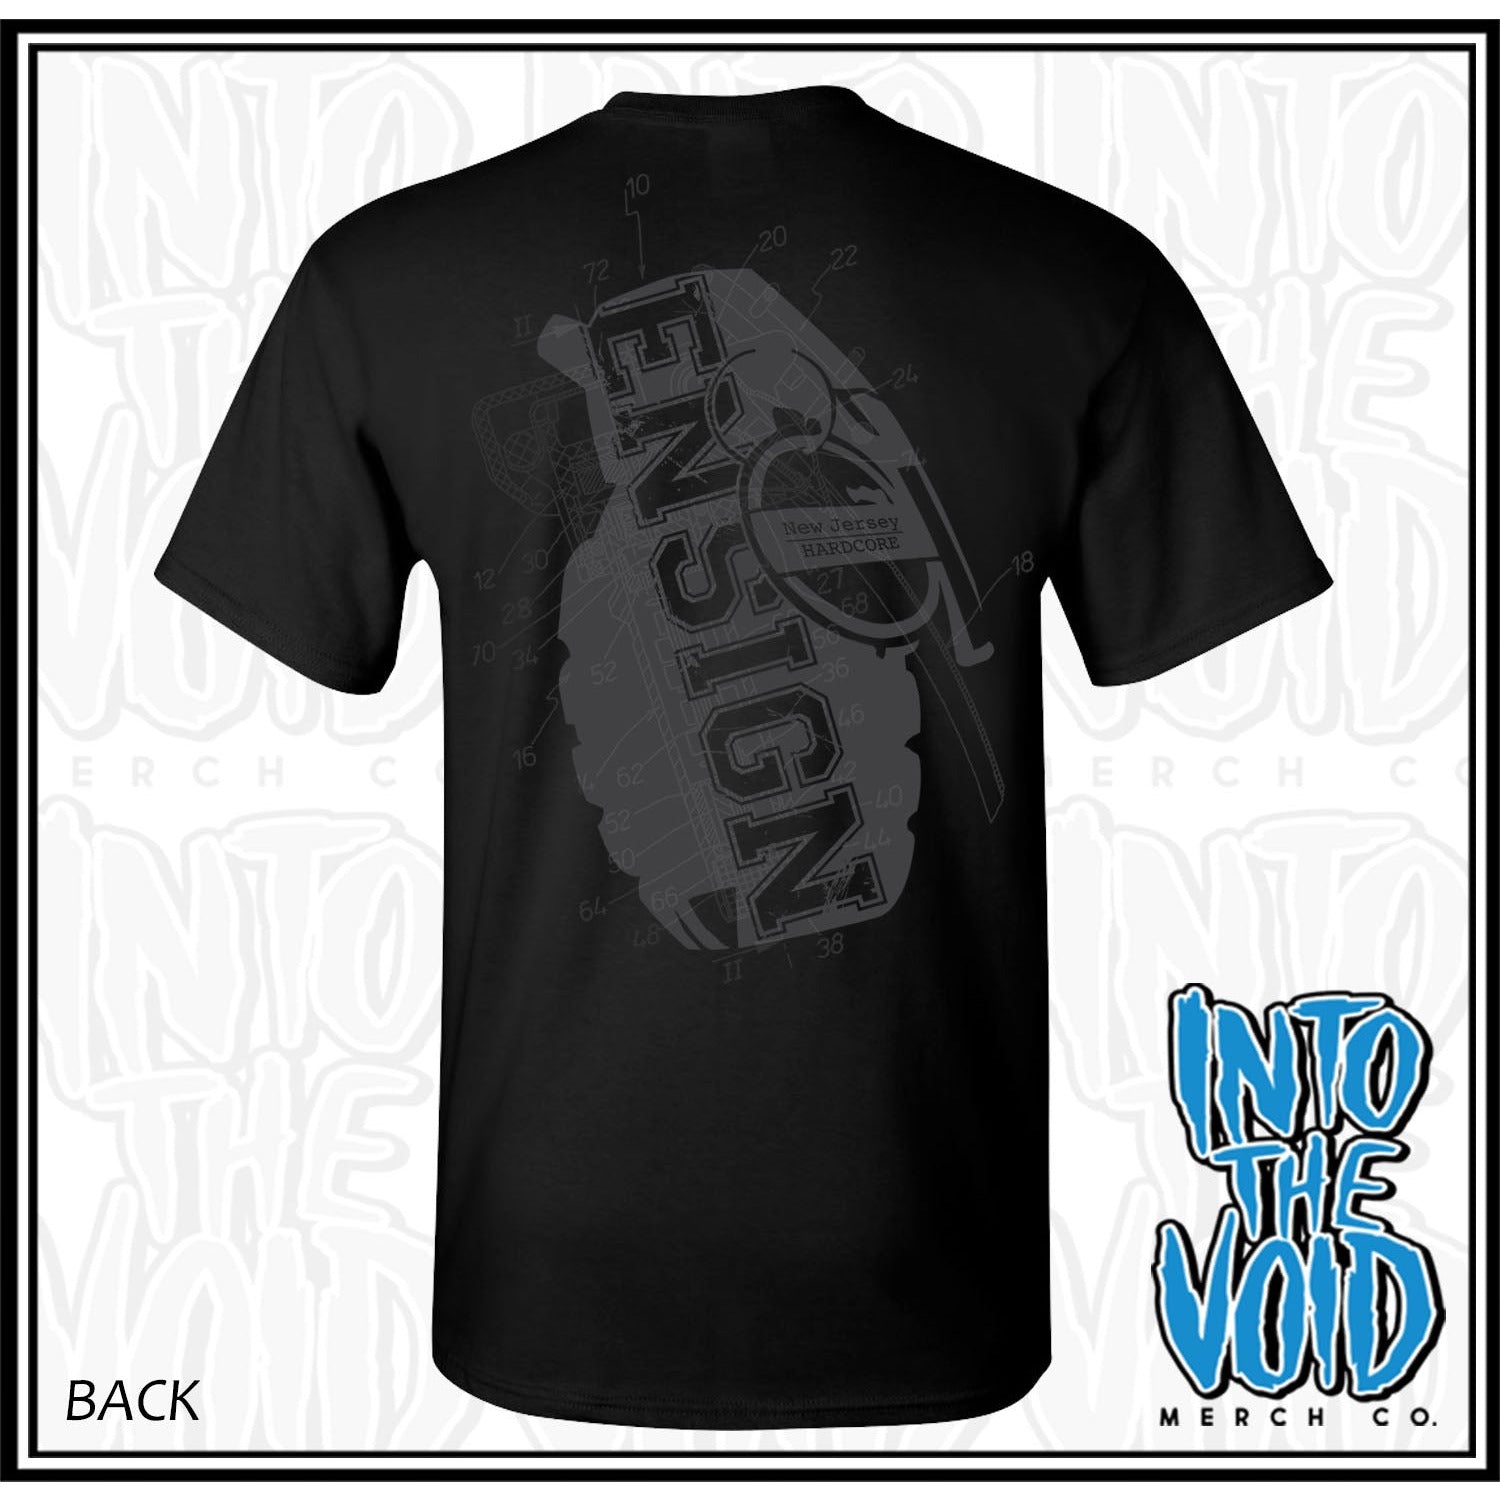 ENSIGN - GRENADE - Short Sleeve T-Shirt - INTO THE VOID Merch Co.